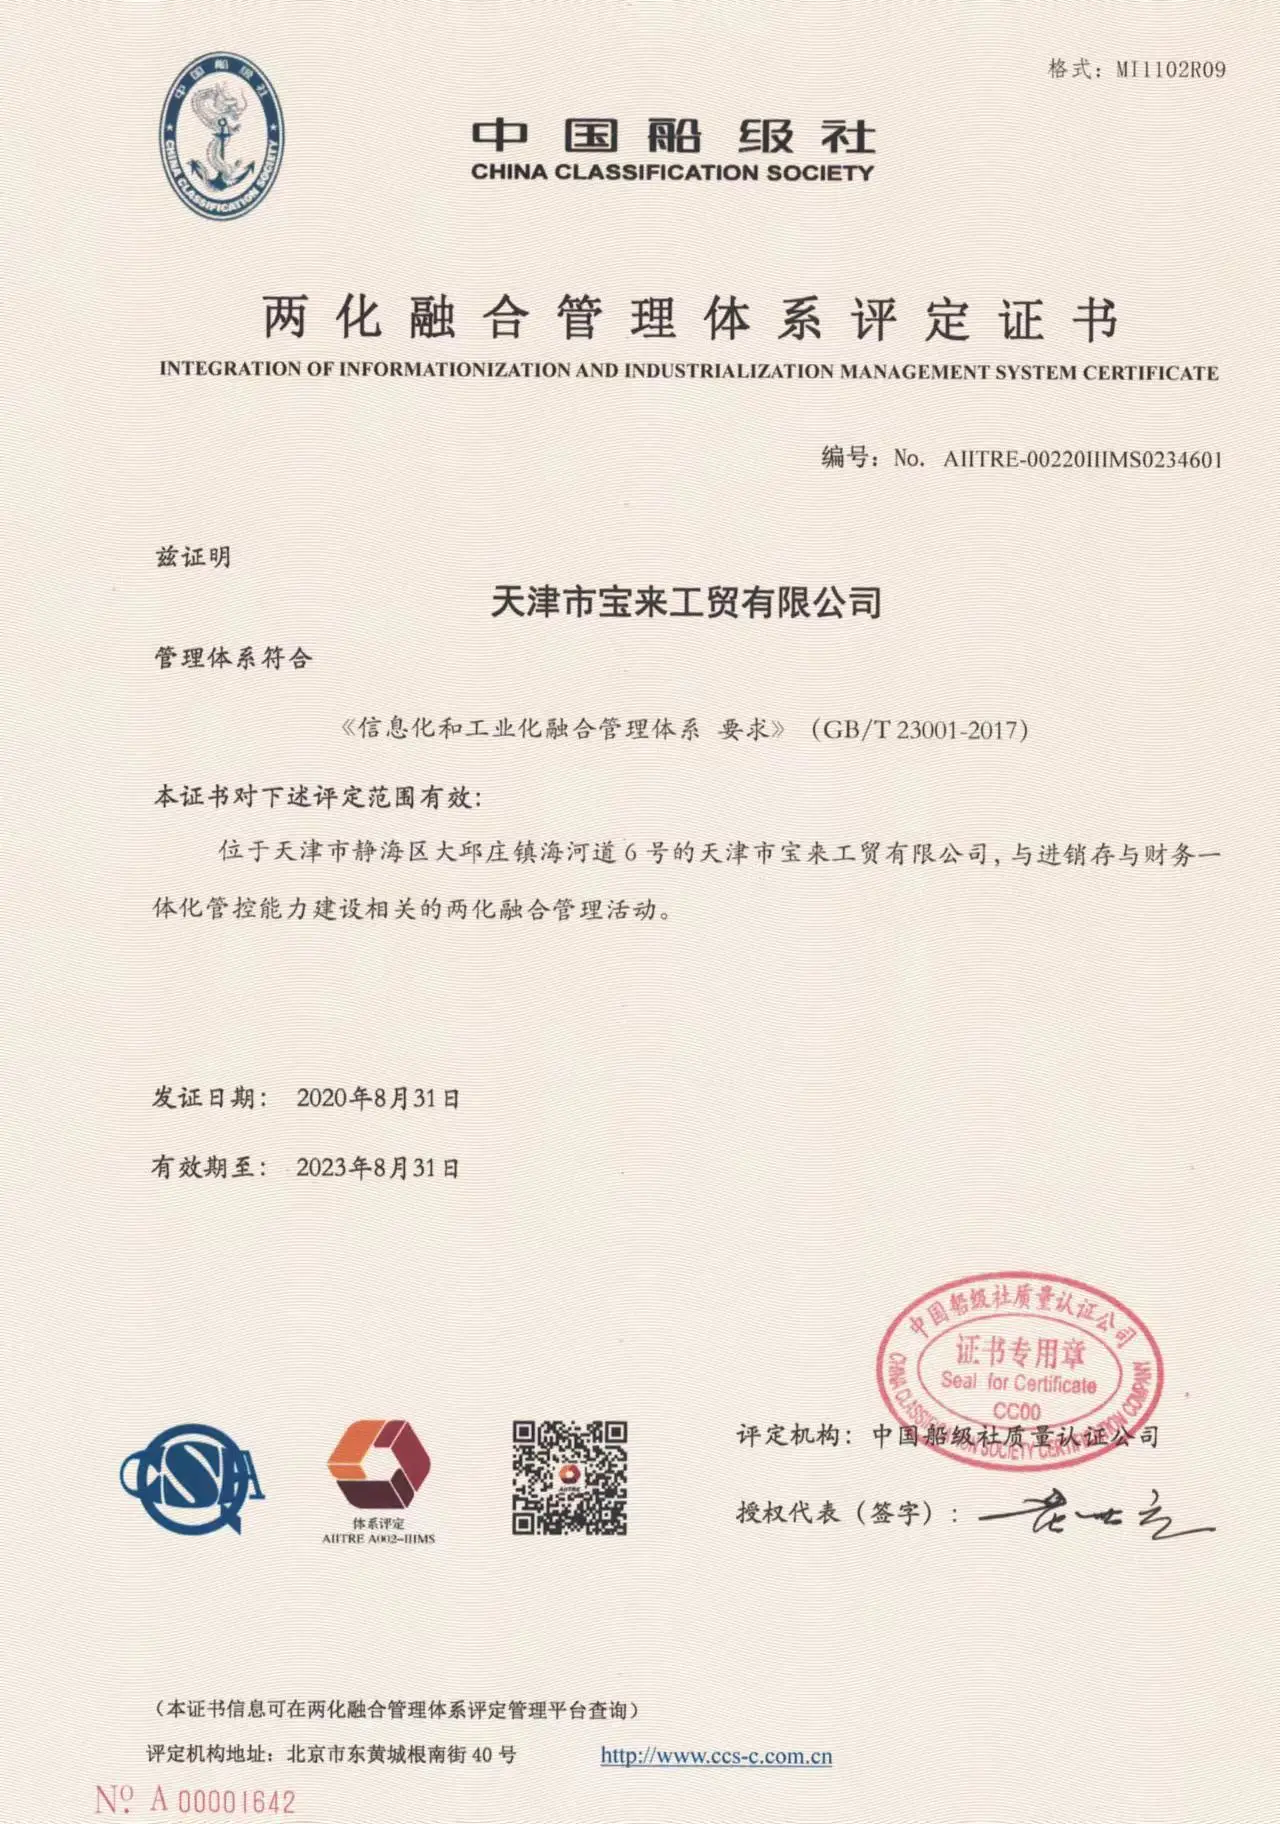 INTEGRATION OF INFORMATIONIZATION AND INDUSTRIALIZATION MANAGEMENT SYSTEM CERTIFICATE